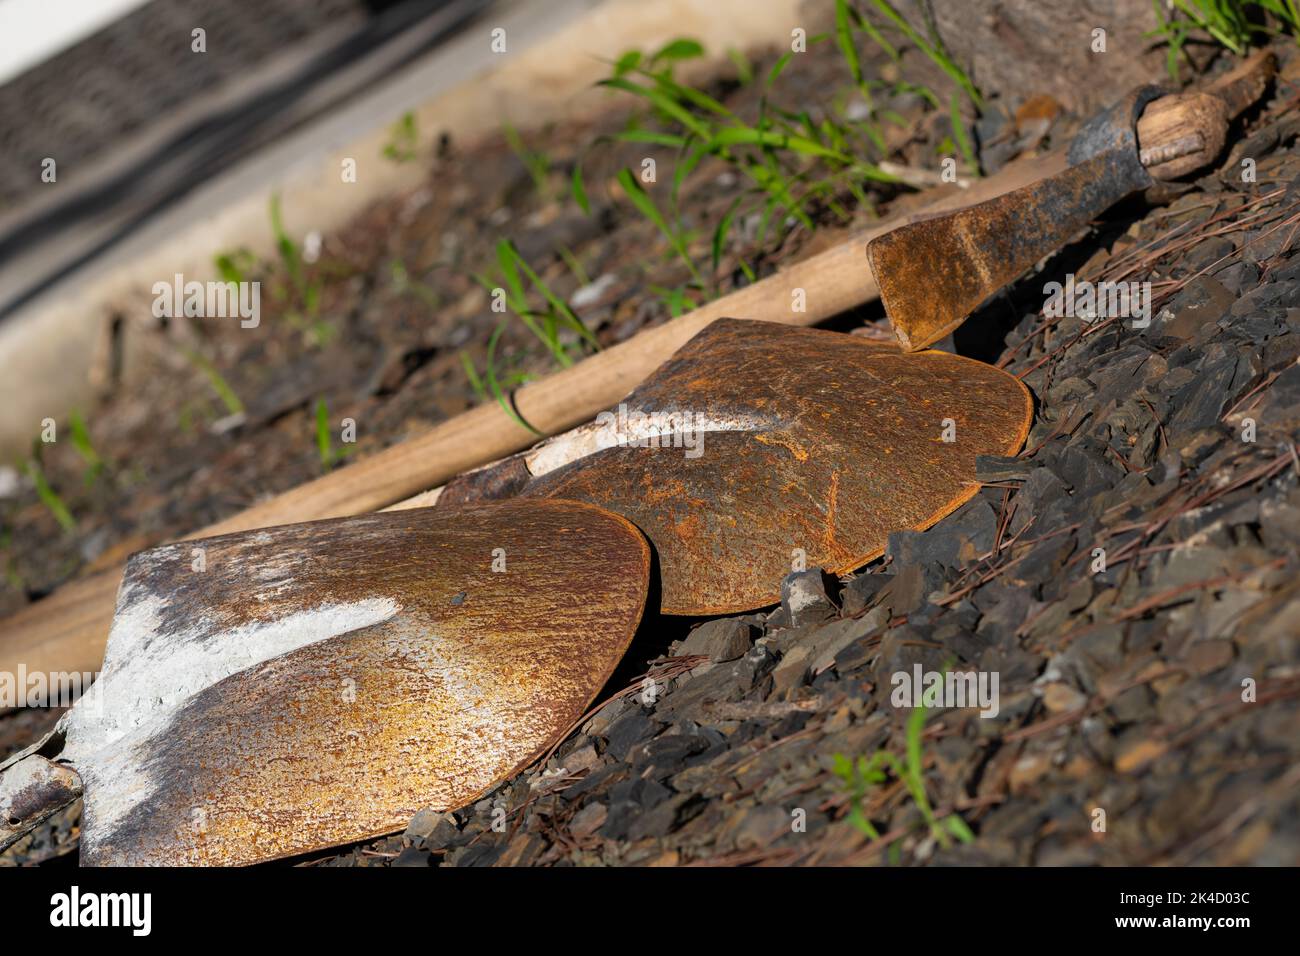 A closeup shot of rusted shovels and a rusted pick axe laid out on the ground Stock Photo